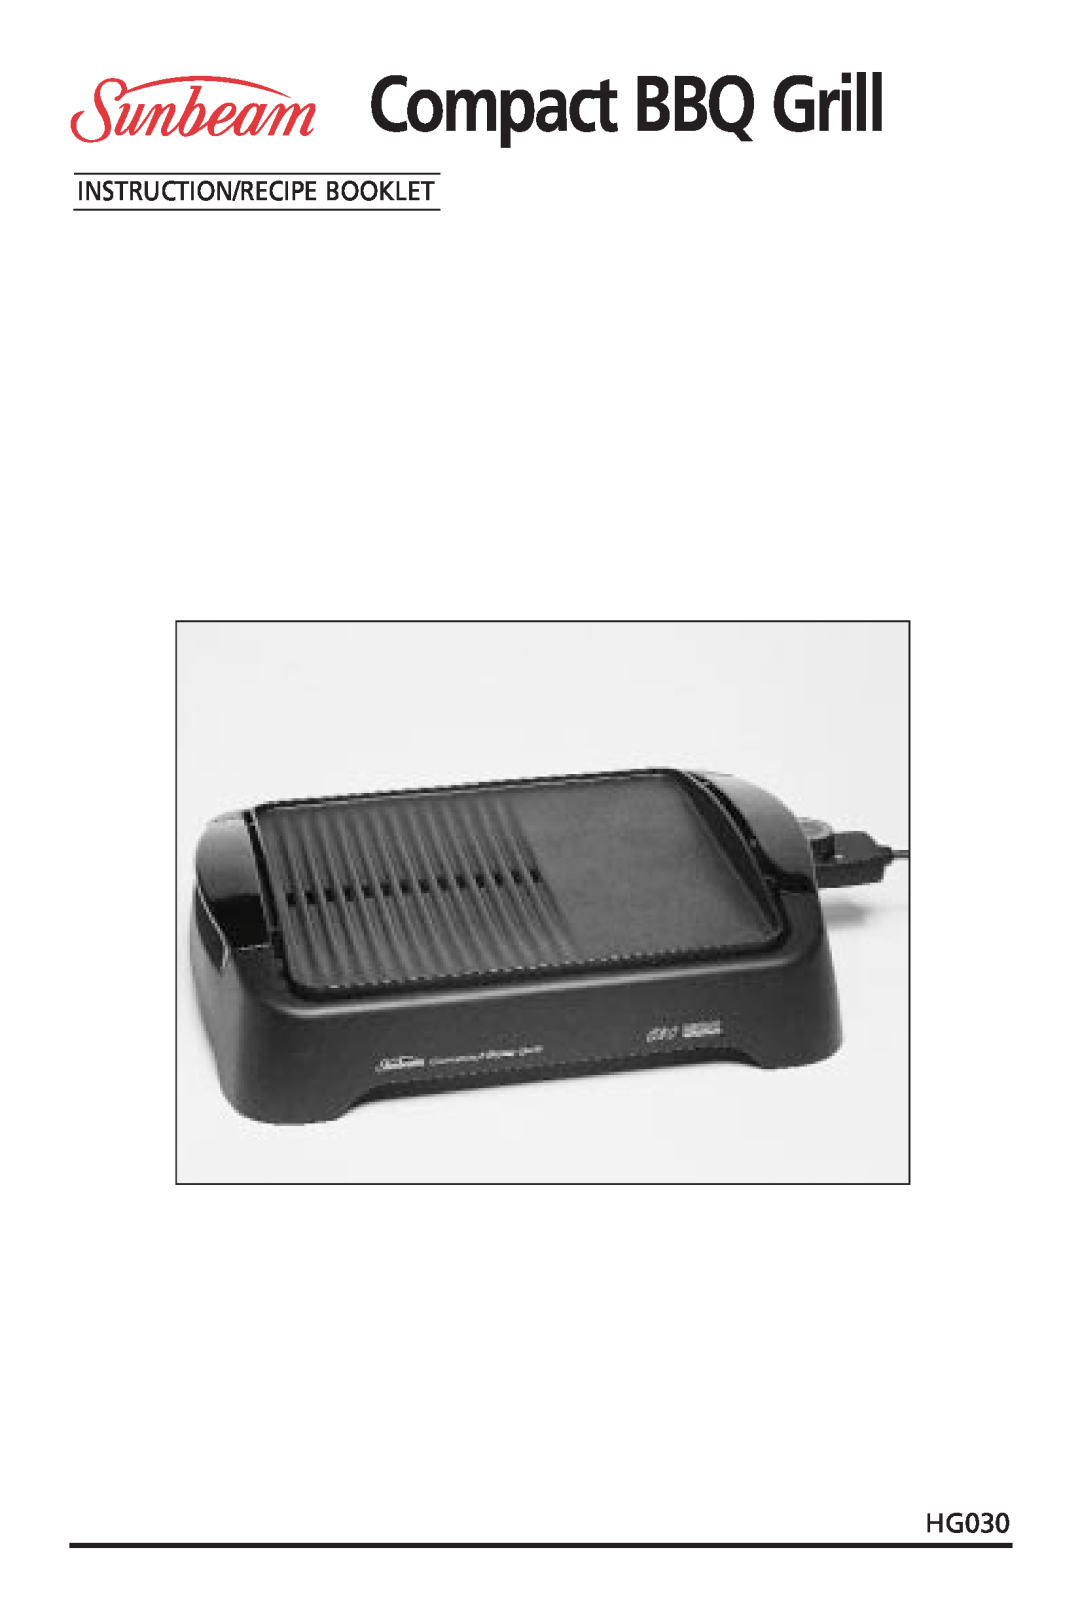 Sunbeam HG030 manual Compact BBQ Grill, Instruction/Recipe Booklet 